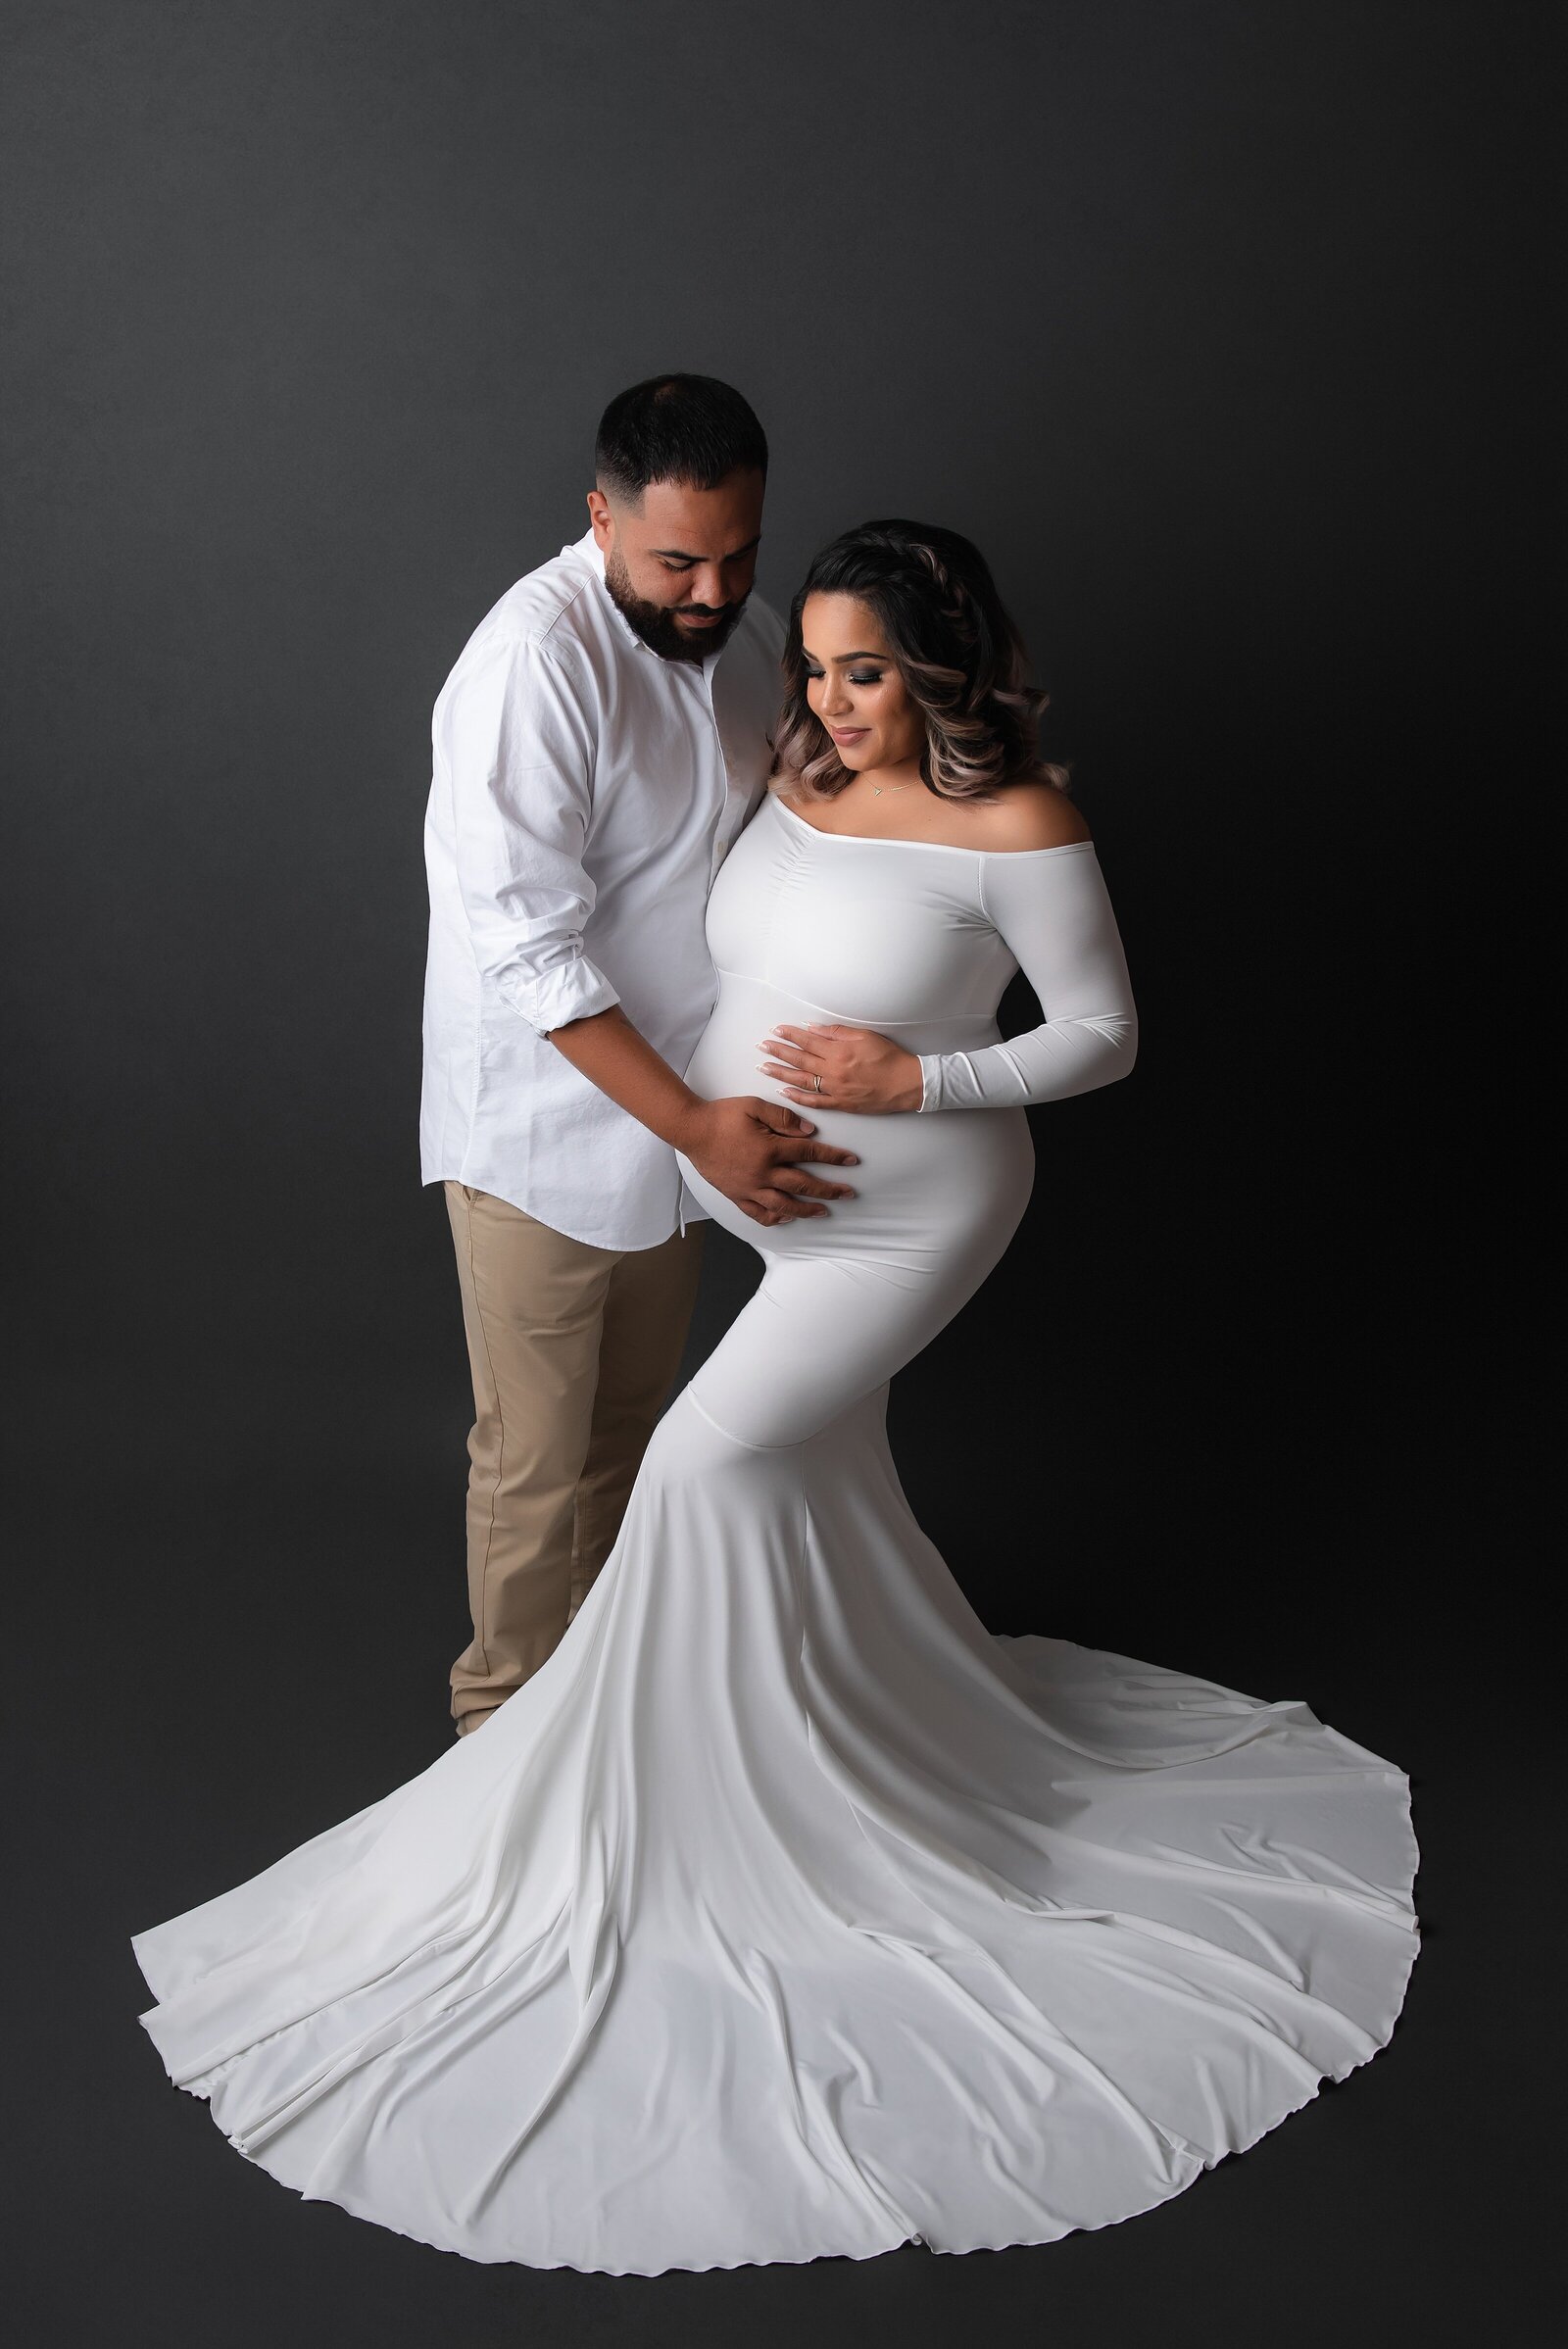 A couple maternity photoshoot in white  gown at Wellington, FL photo studio.